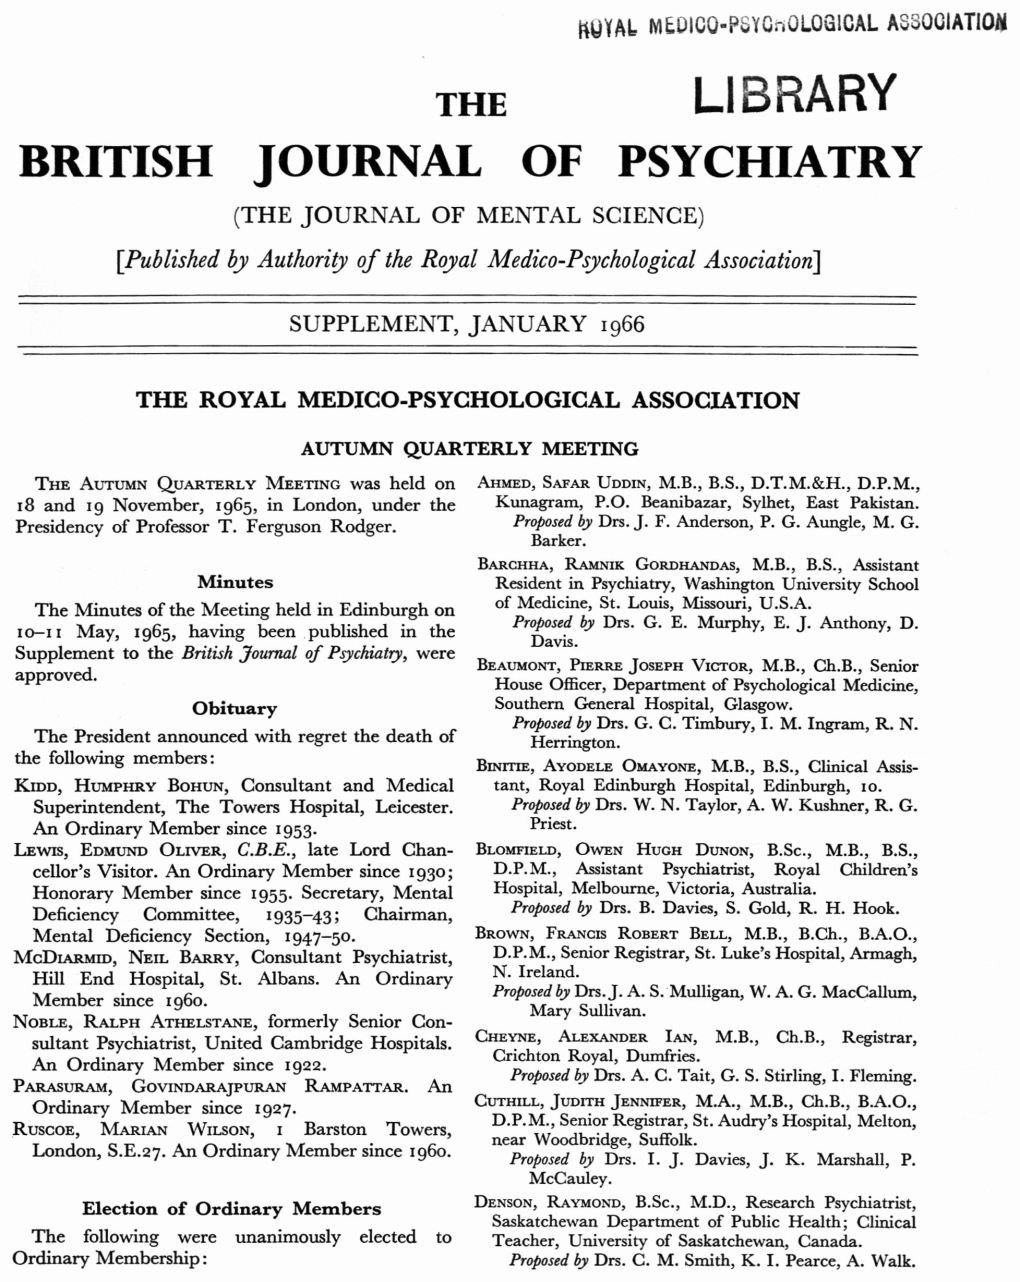 The Library British Journal of Psychiatry (The Journal of Mental Science)